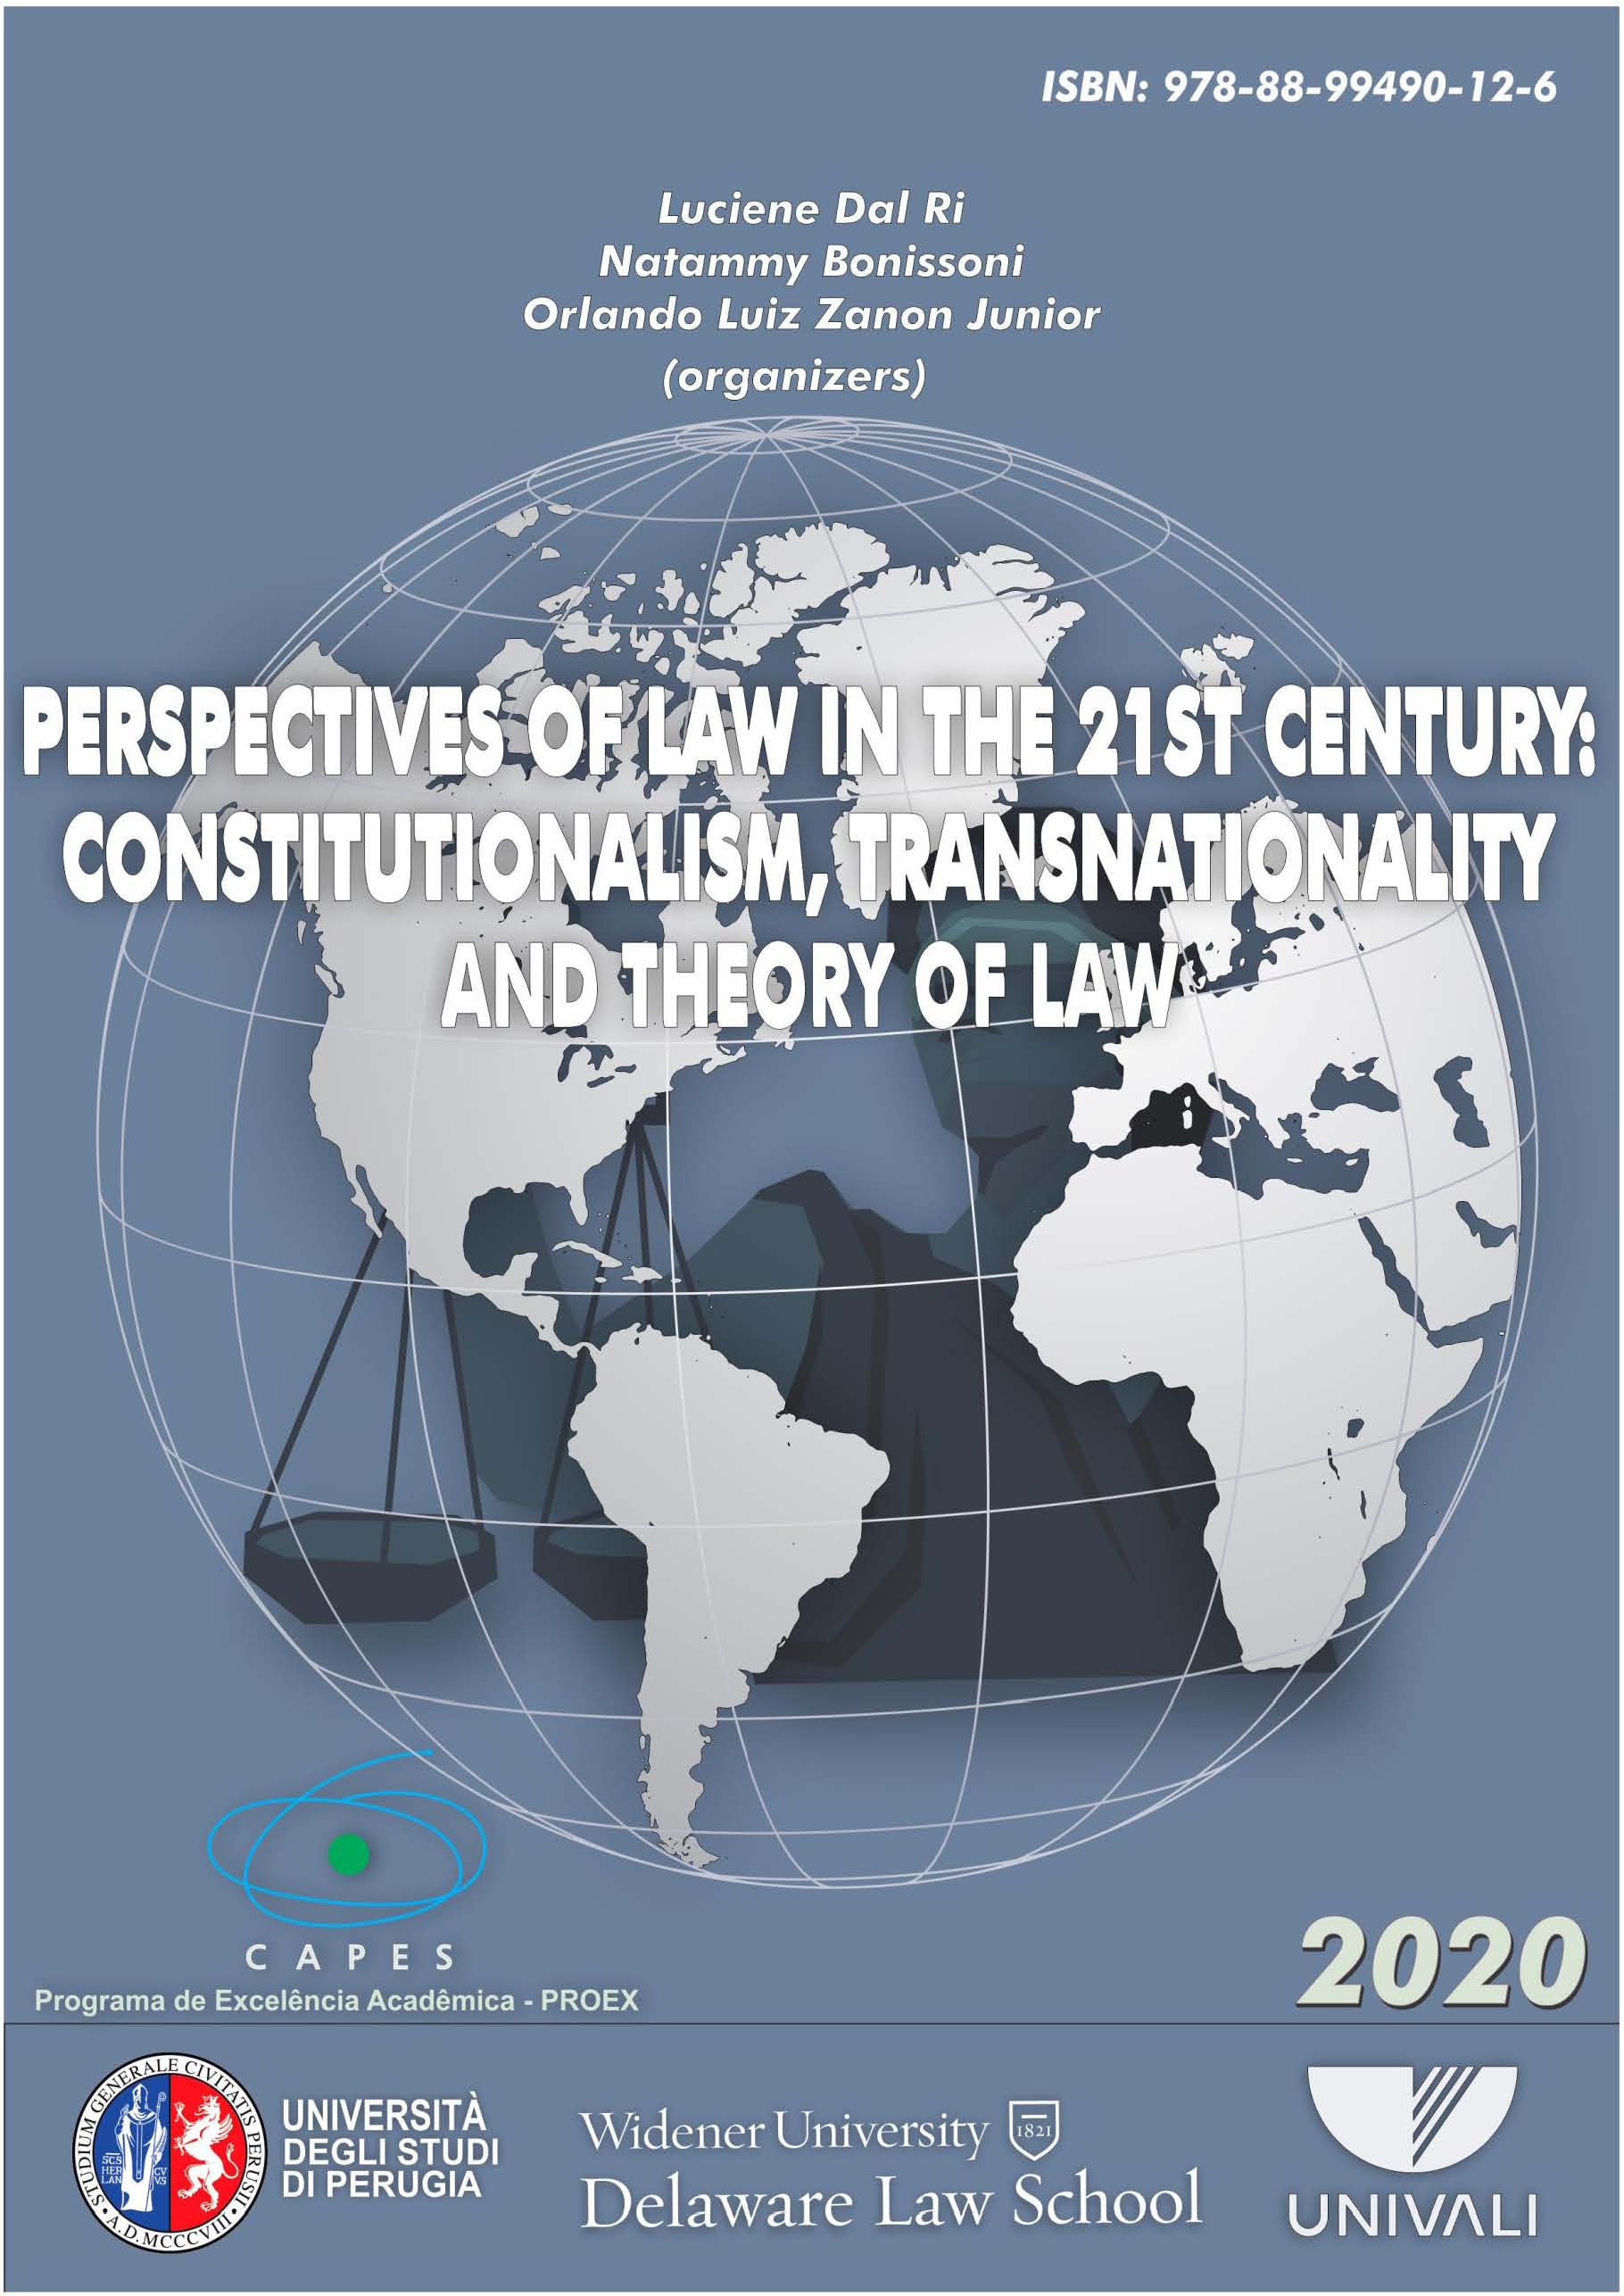 pagine da ebook 2020 perspectives of law in the 21st century 30 11 2020